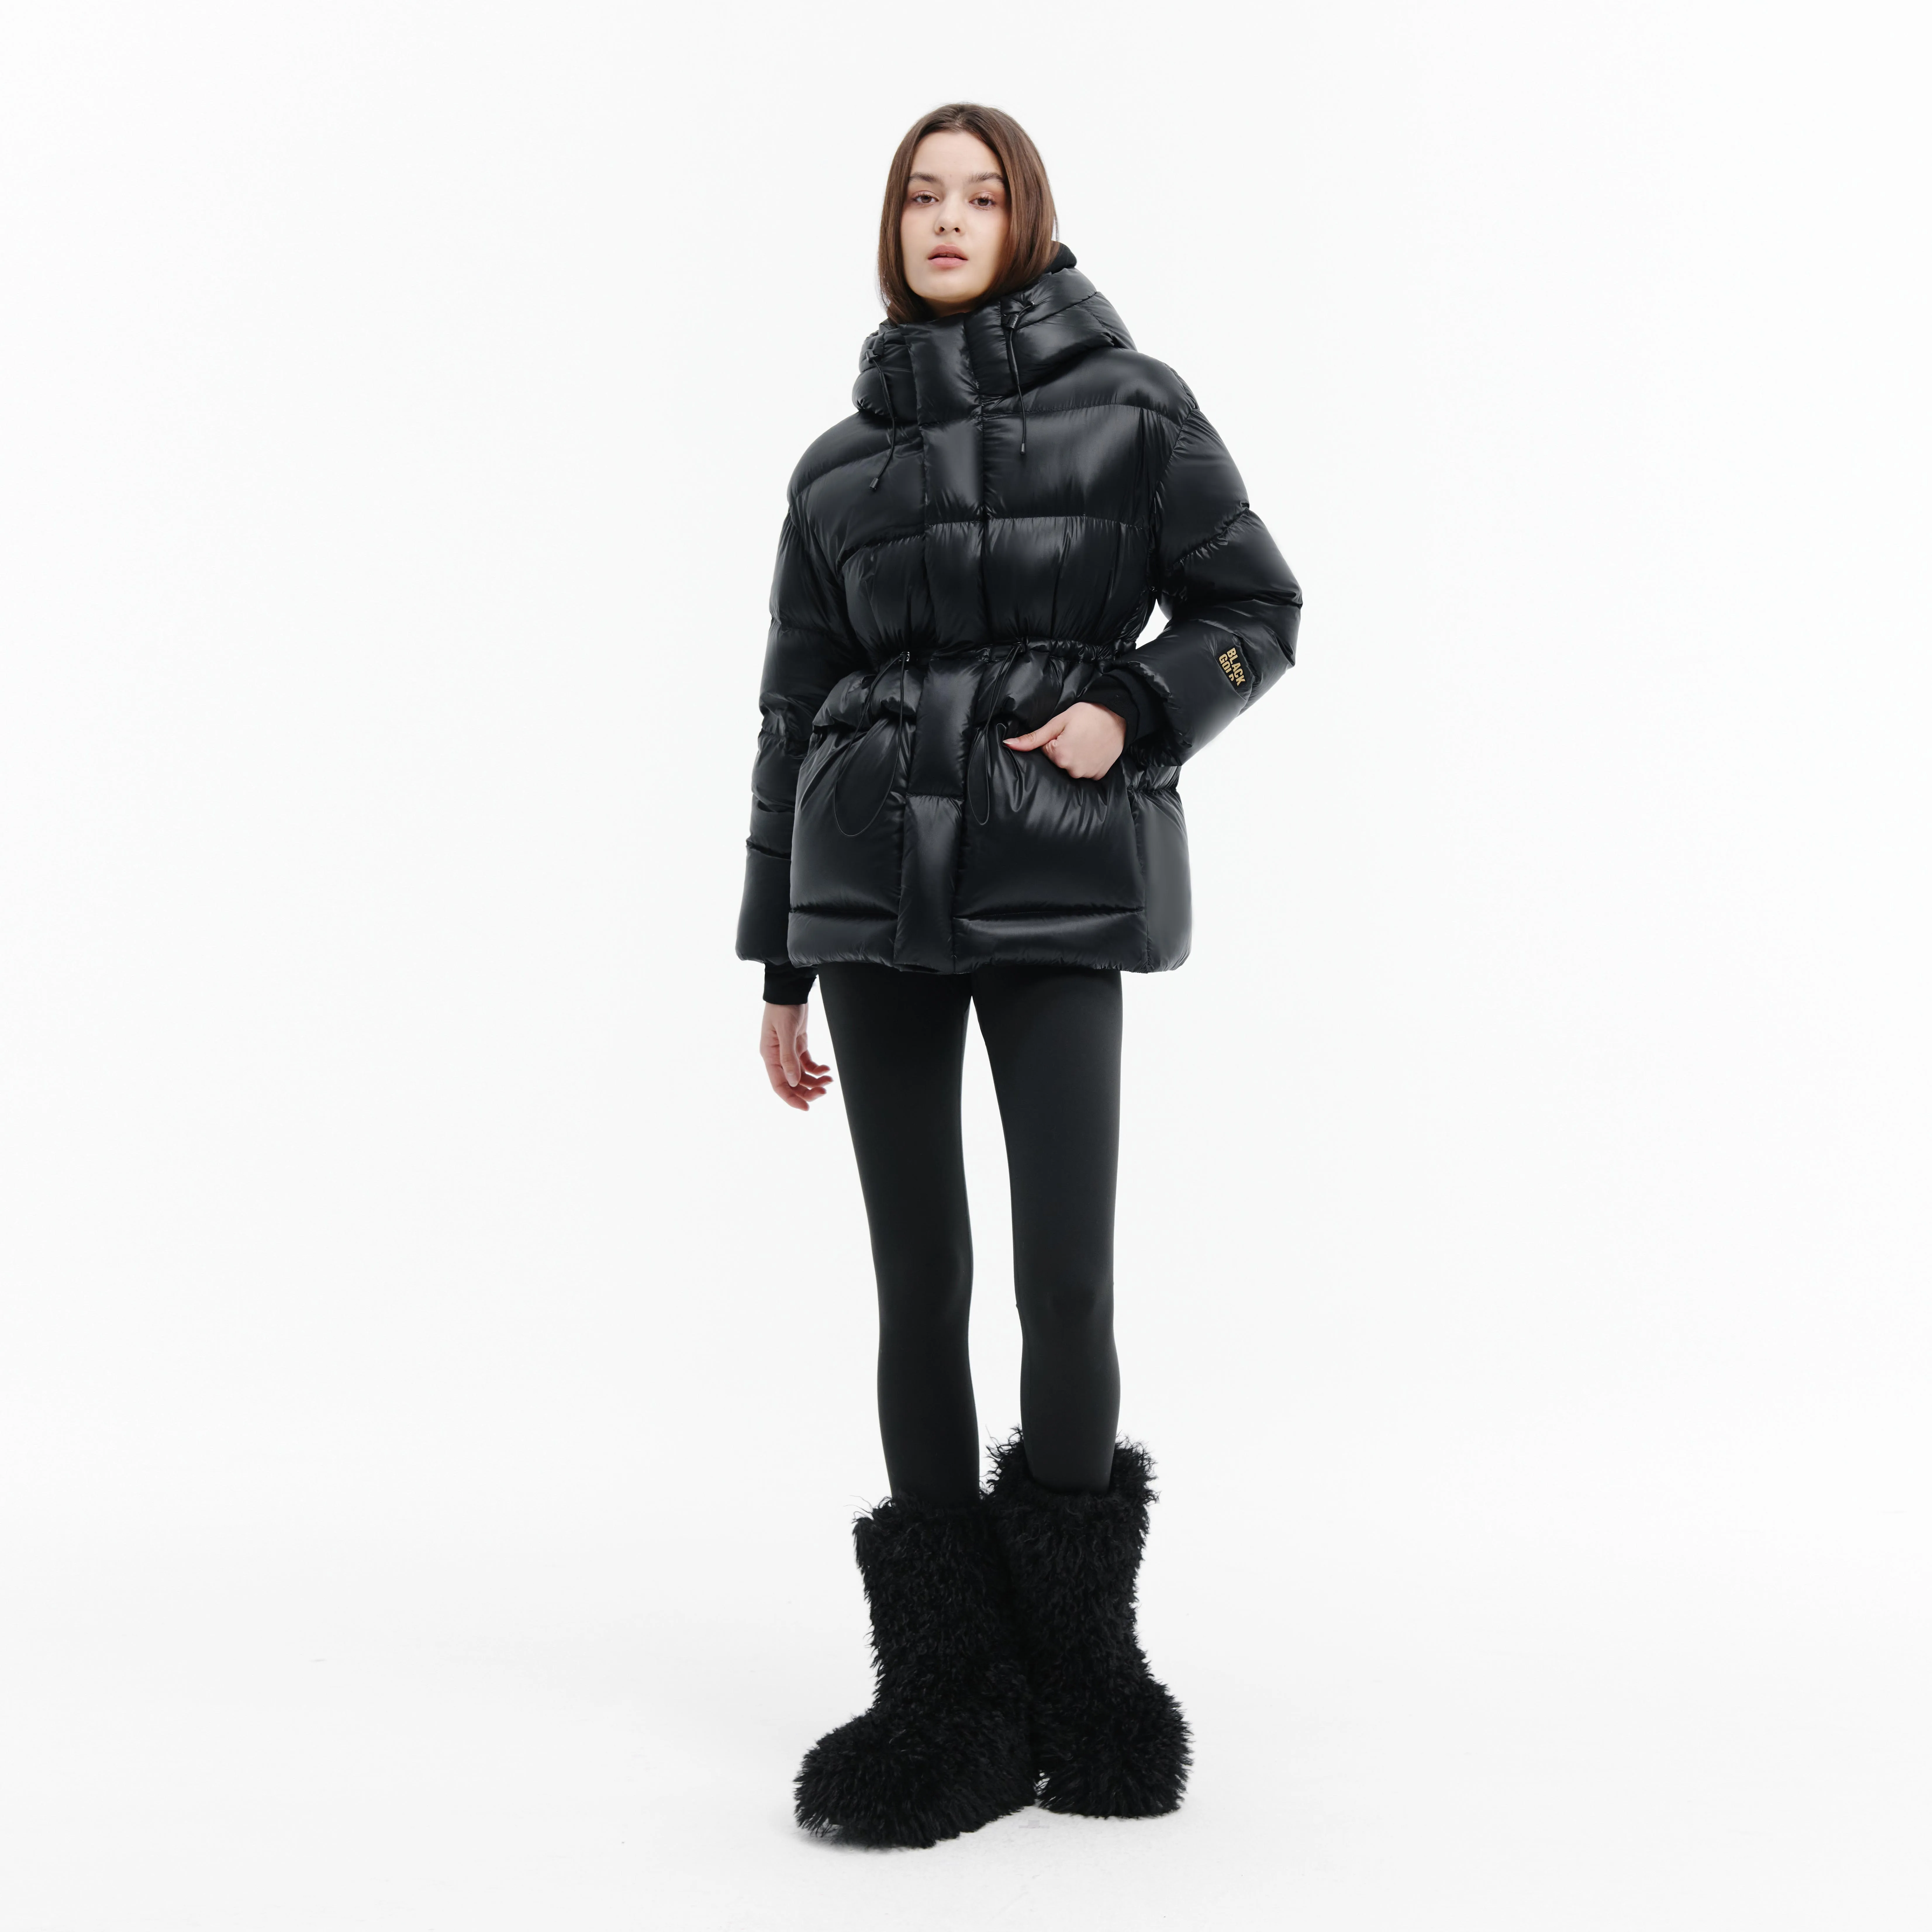 Women's Down Jacket Stand-up Collar Hooded Windproof Zipper Woven Loose for Winter Professional Supply High End Black Canvas